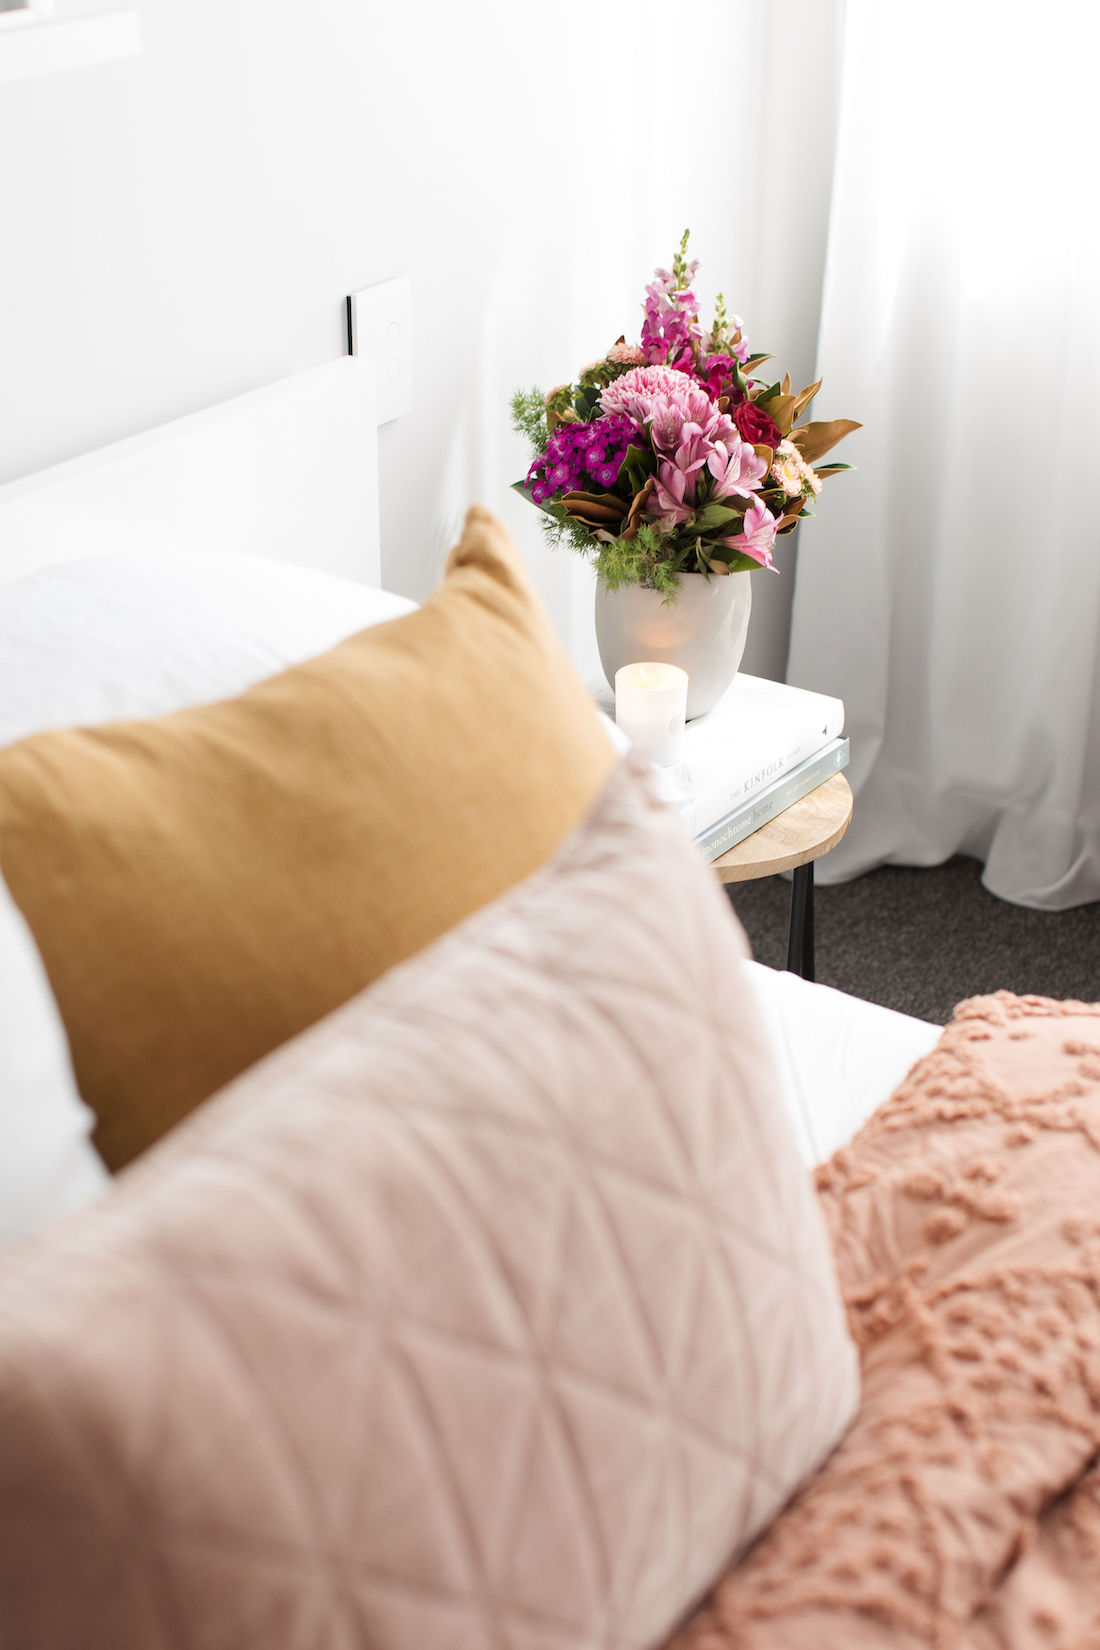 Use flowers to decorate your small rental apartment